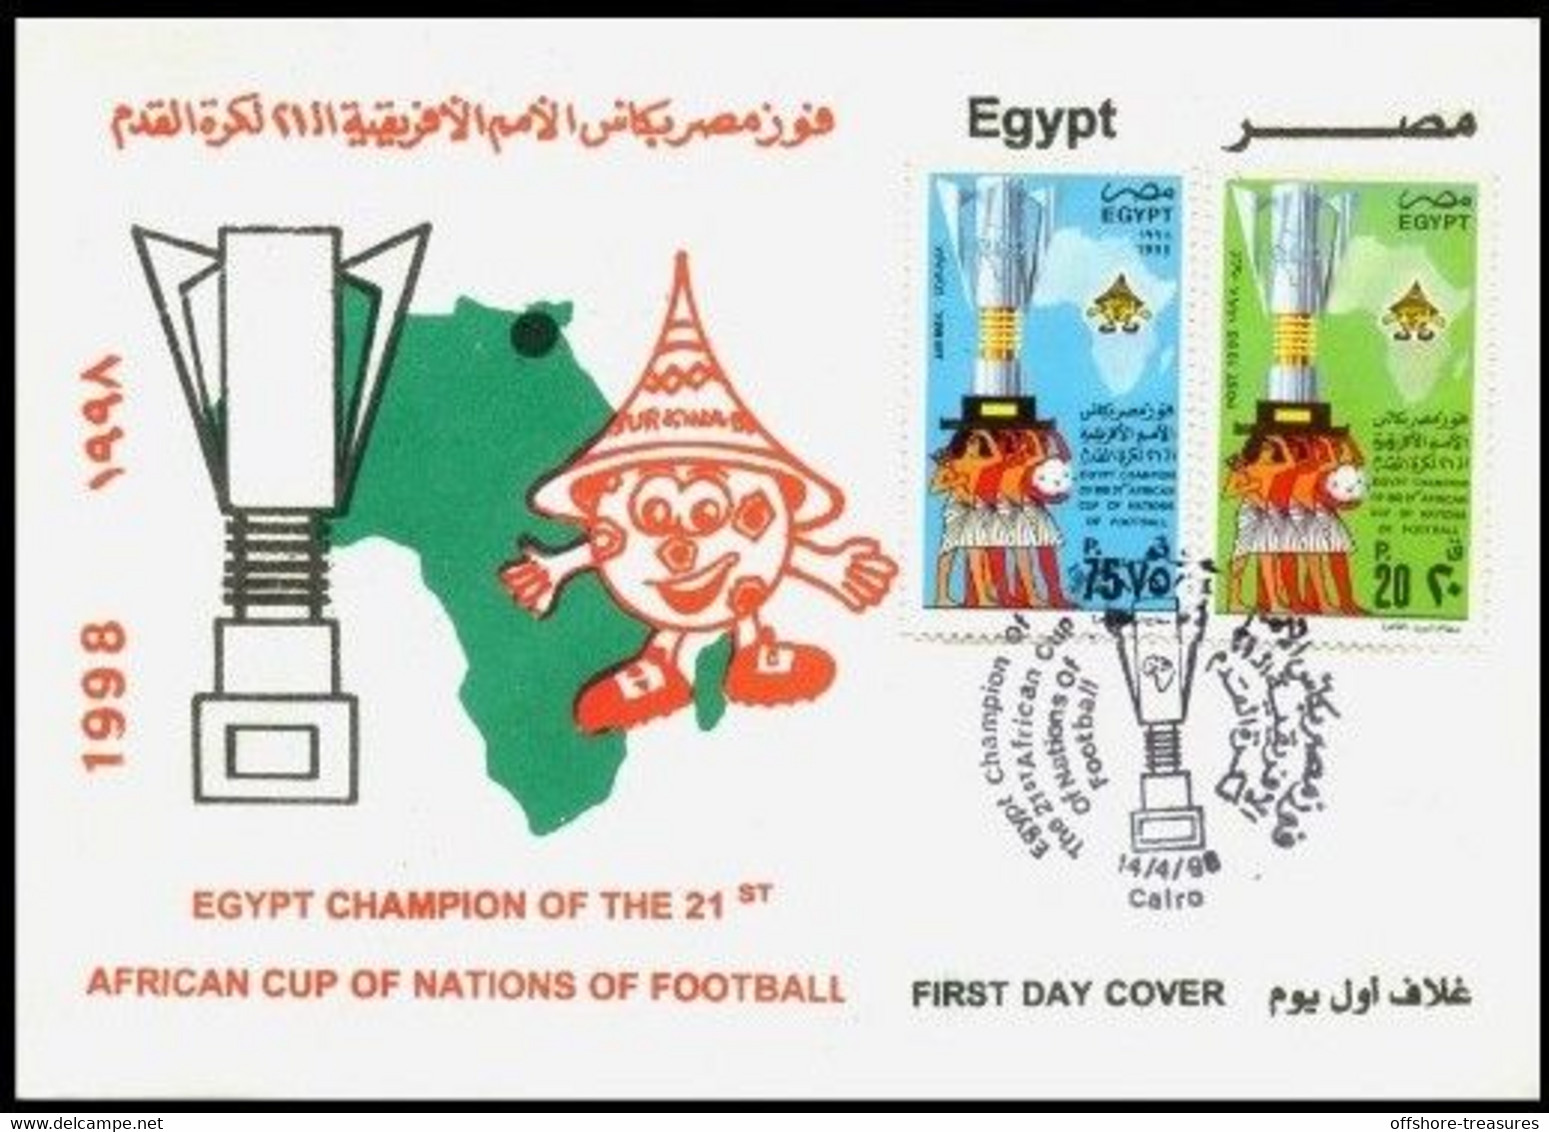 Egypt FOOTBALL WINNER 1998 First Day Cover - FDC 2 Stamps 75P & 20P AFRICAN NATIONS CUP BURKINA FASO - Covers & Documents